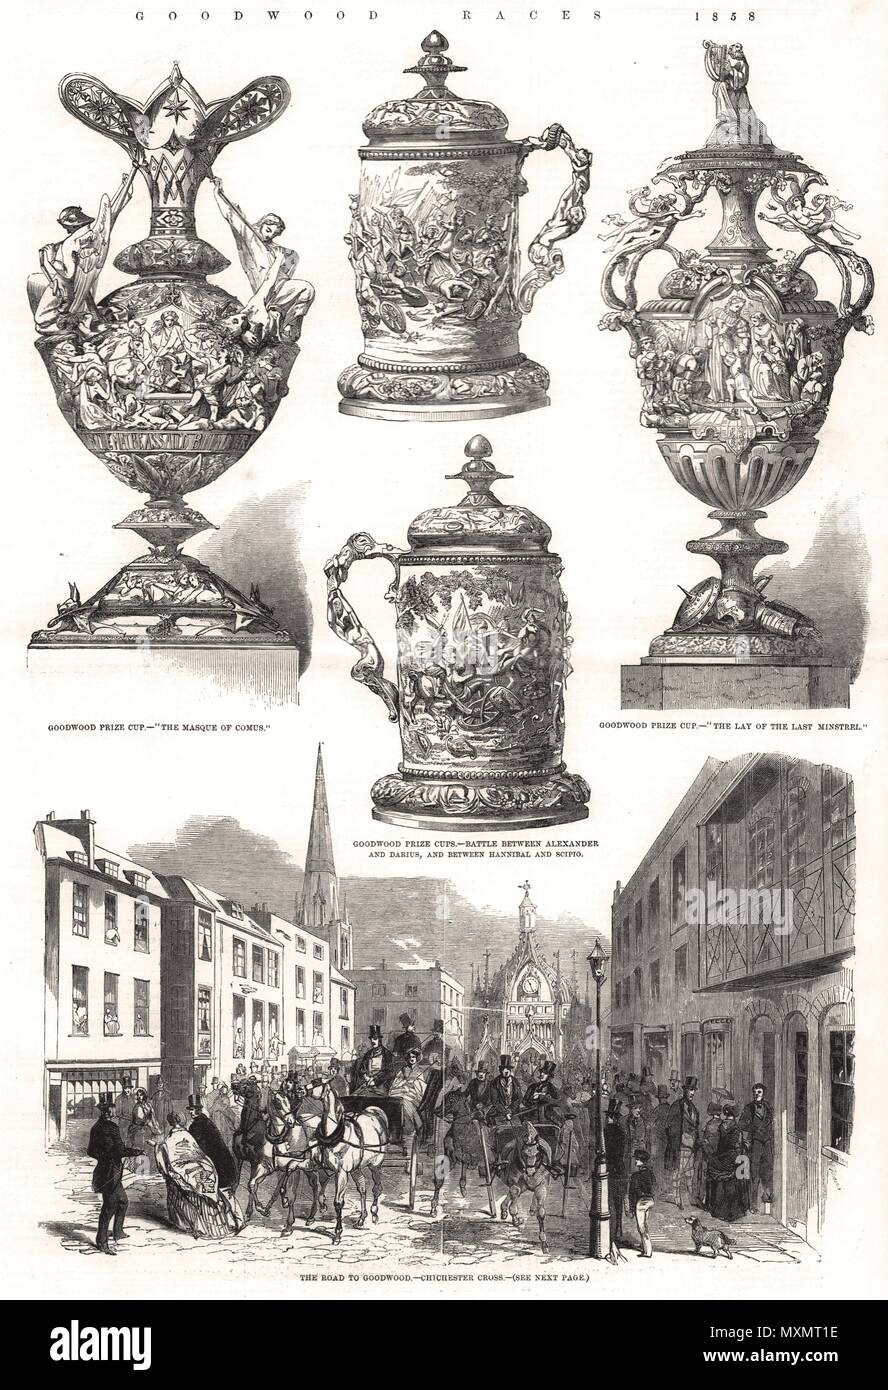 Goodwood Races Prize Cups. The Road To Goodwood. Chichester Cross. Sussex 1858. The Illustrated London News Stock Photo